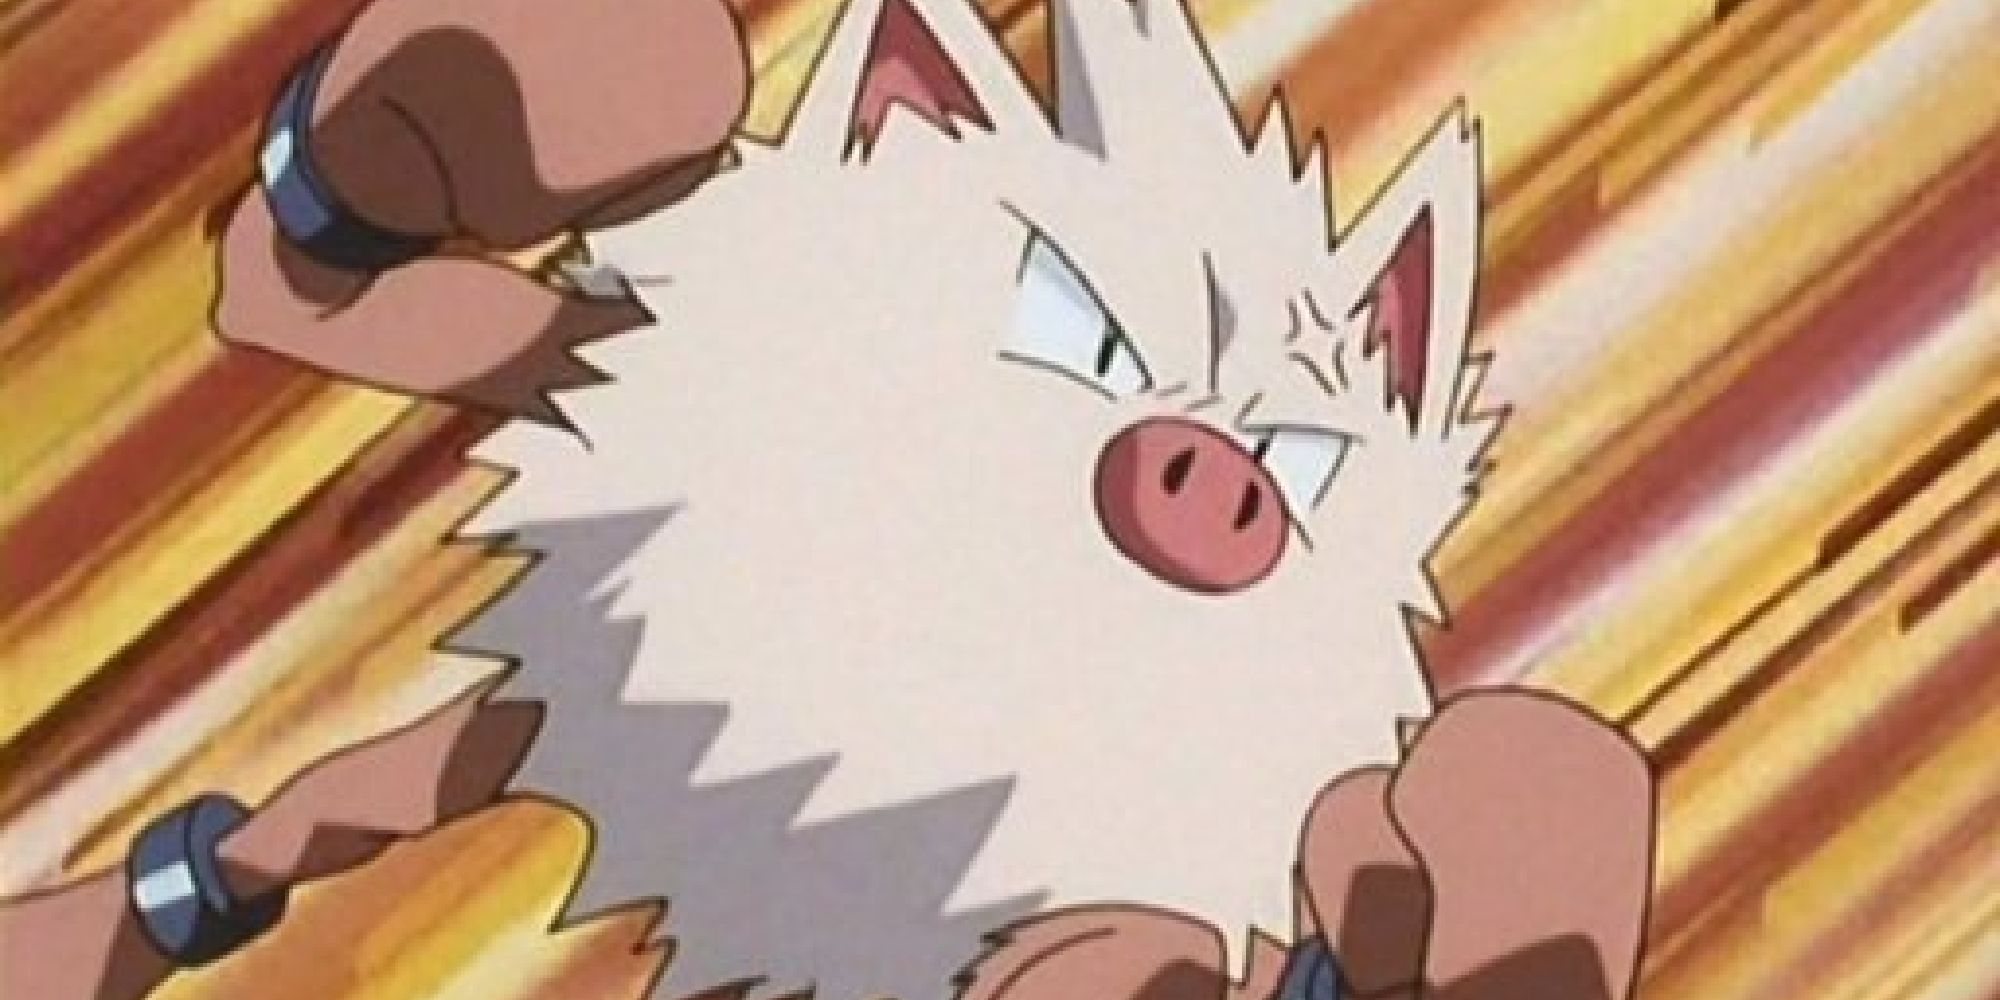 Primeape raising its fist mid-battle in the anime